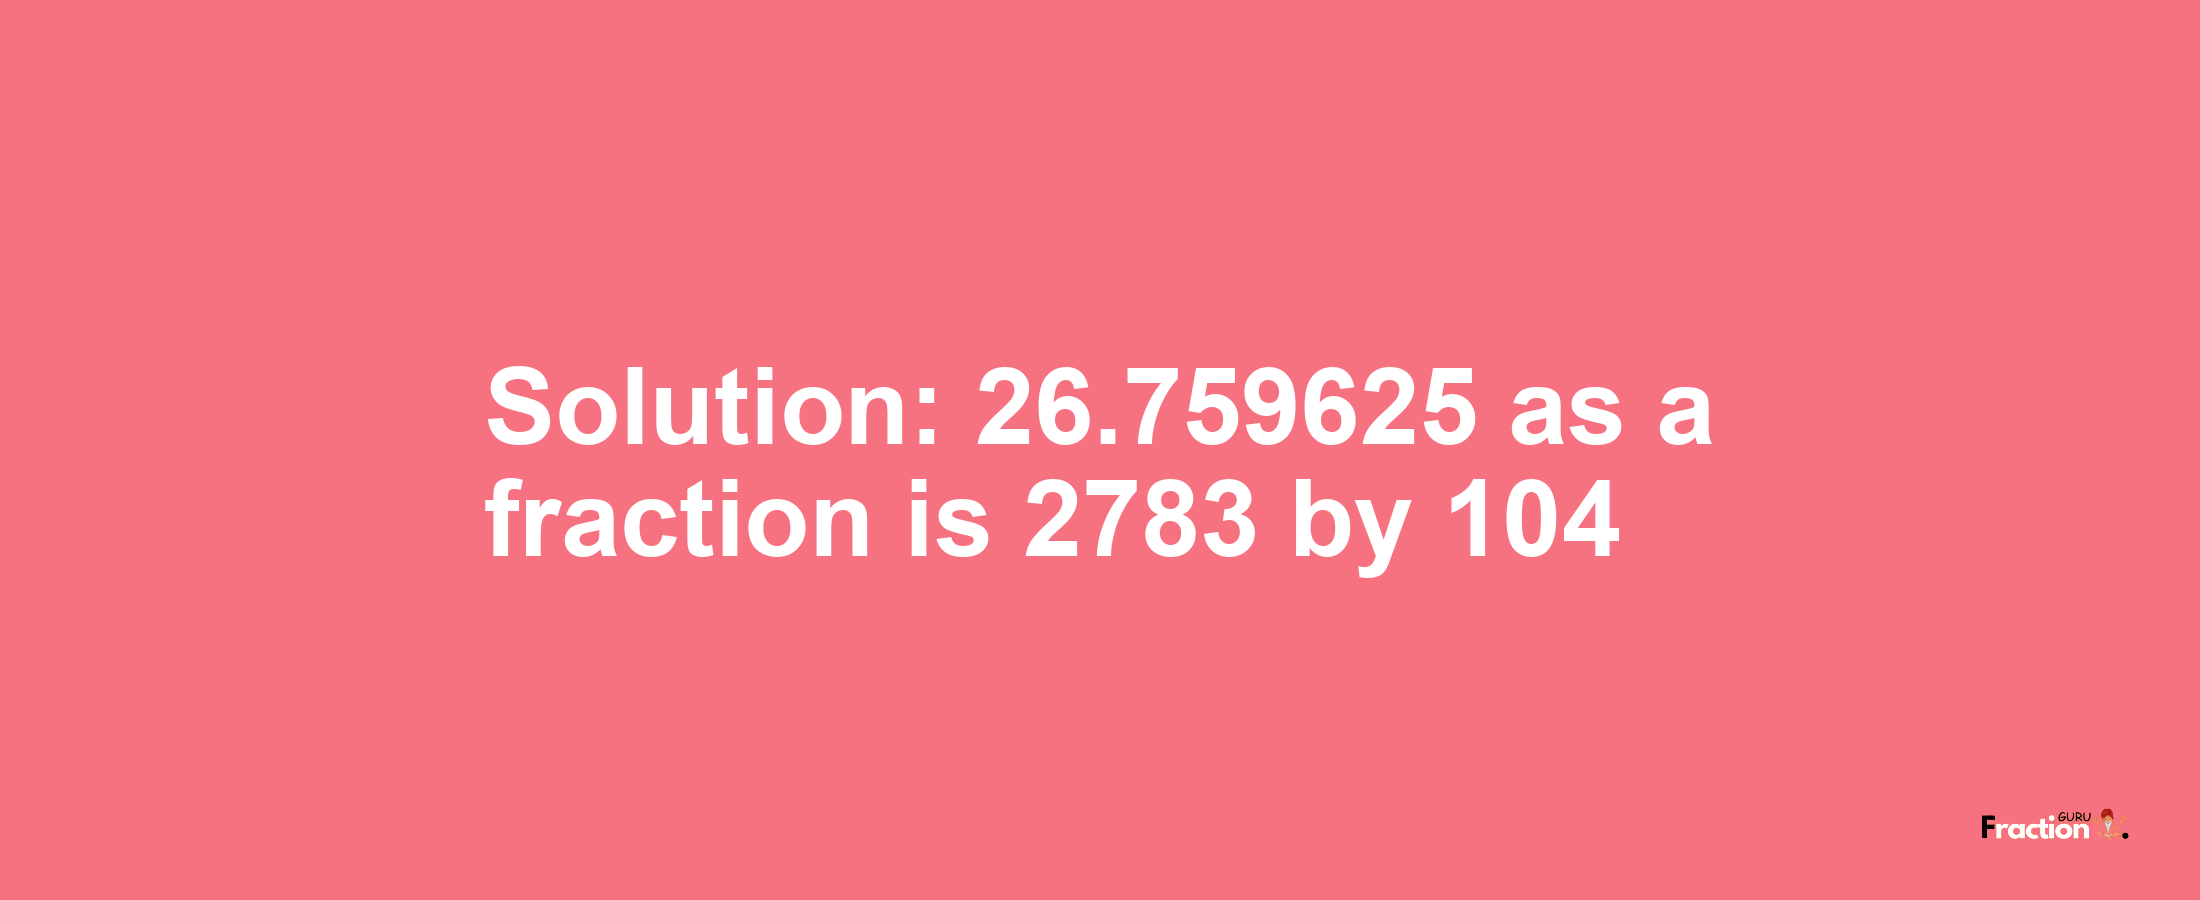 Solution:26.759625 as a fraction is 2783/104